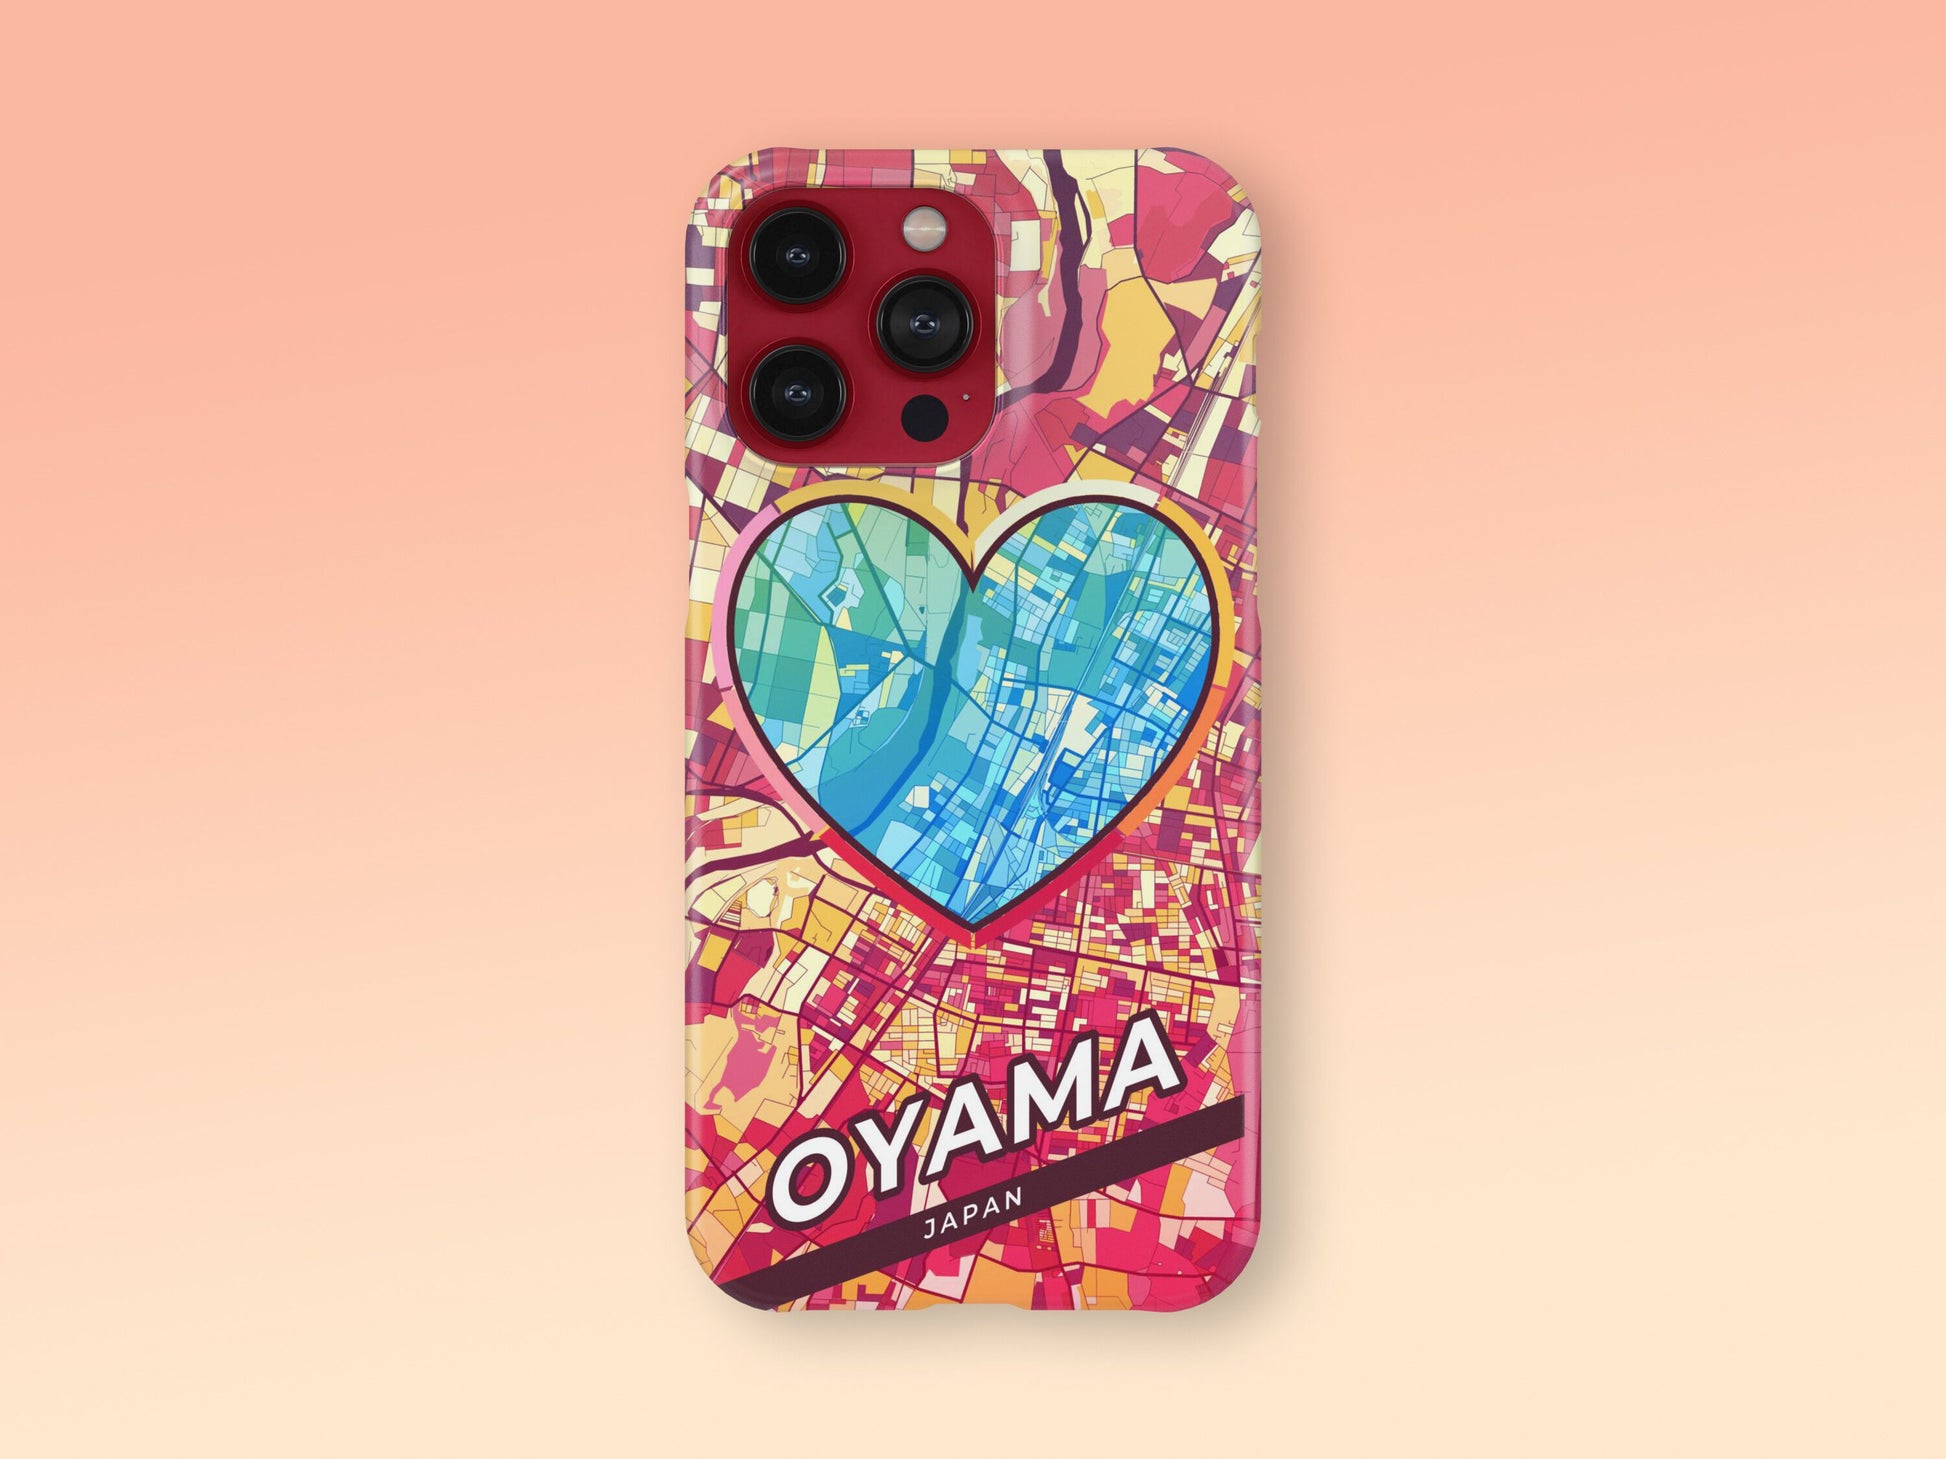 Oyama Japan slim phone case with colorful icon 2